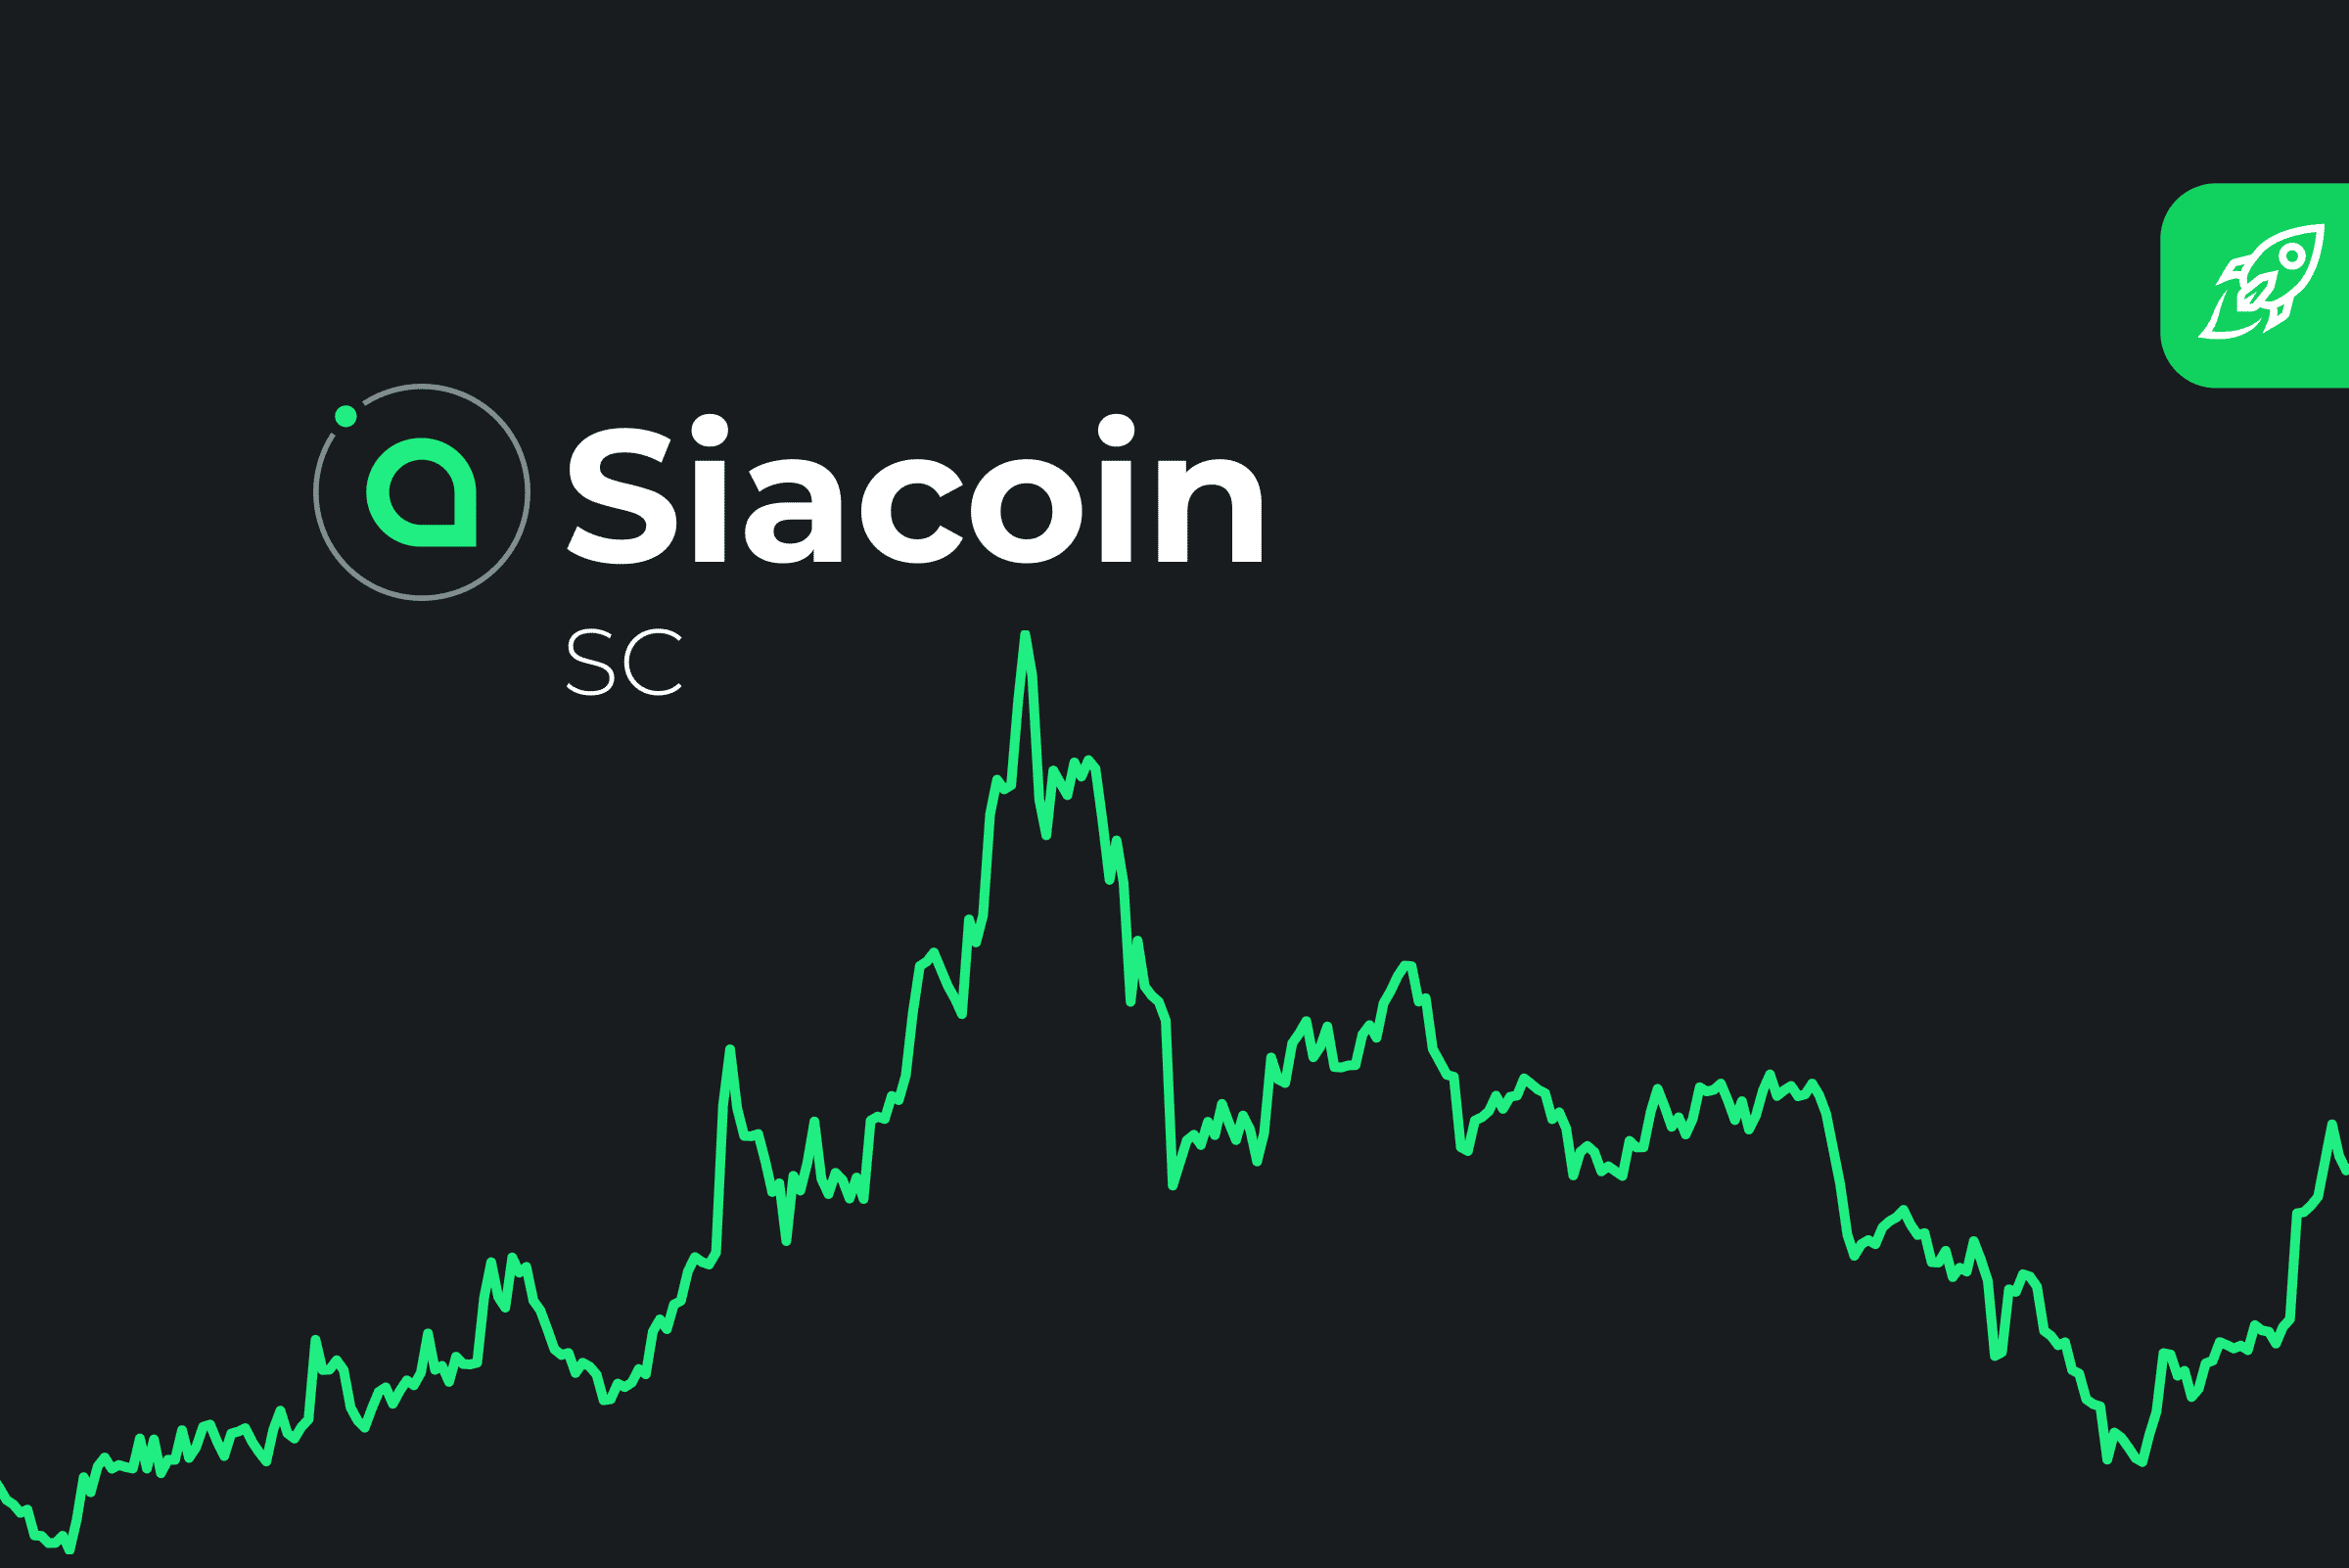 Siacoin (SC). All about cryptocurrency - BitcoinWiki